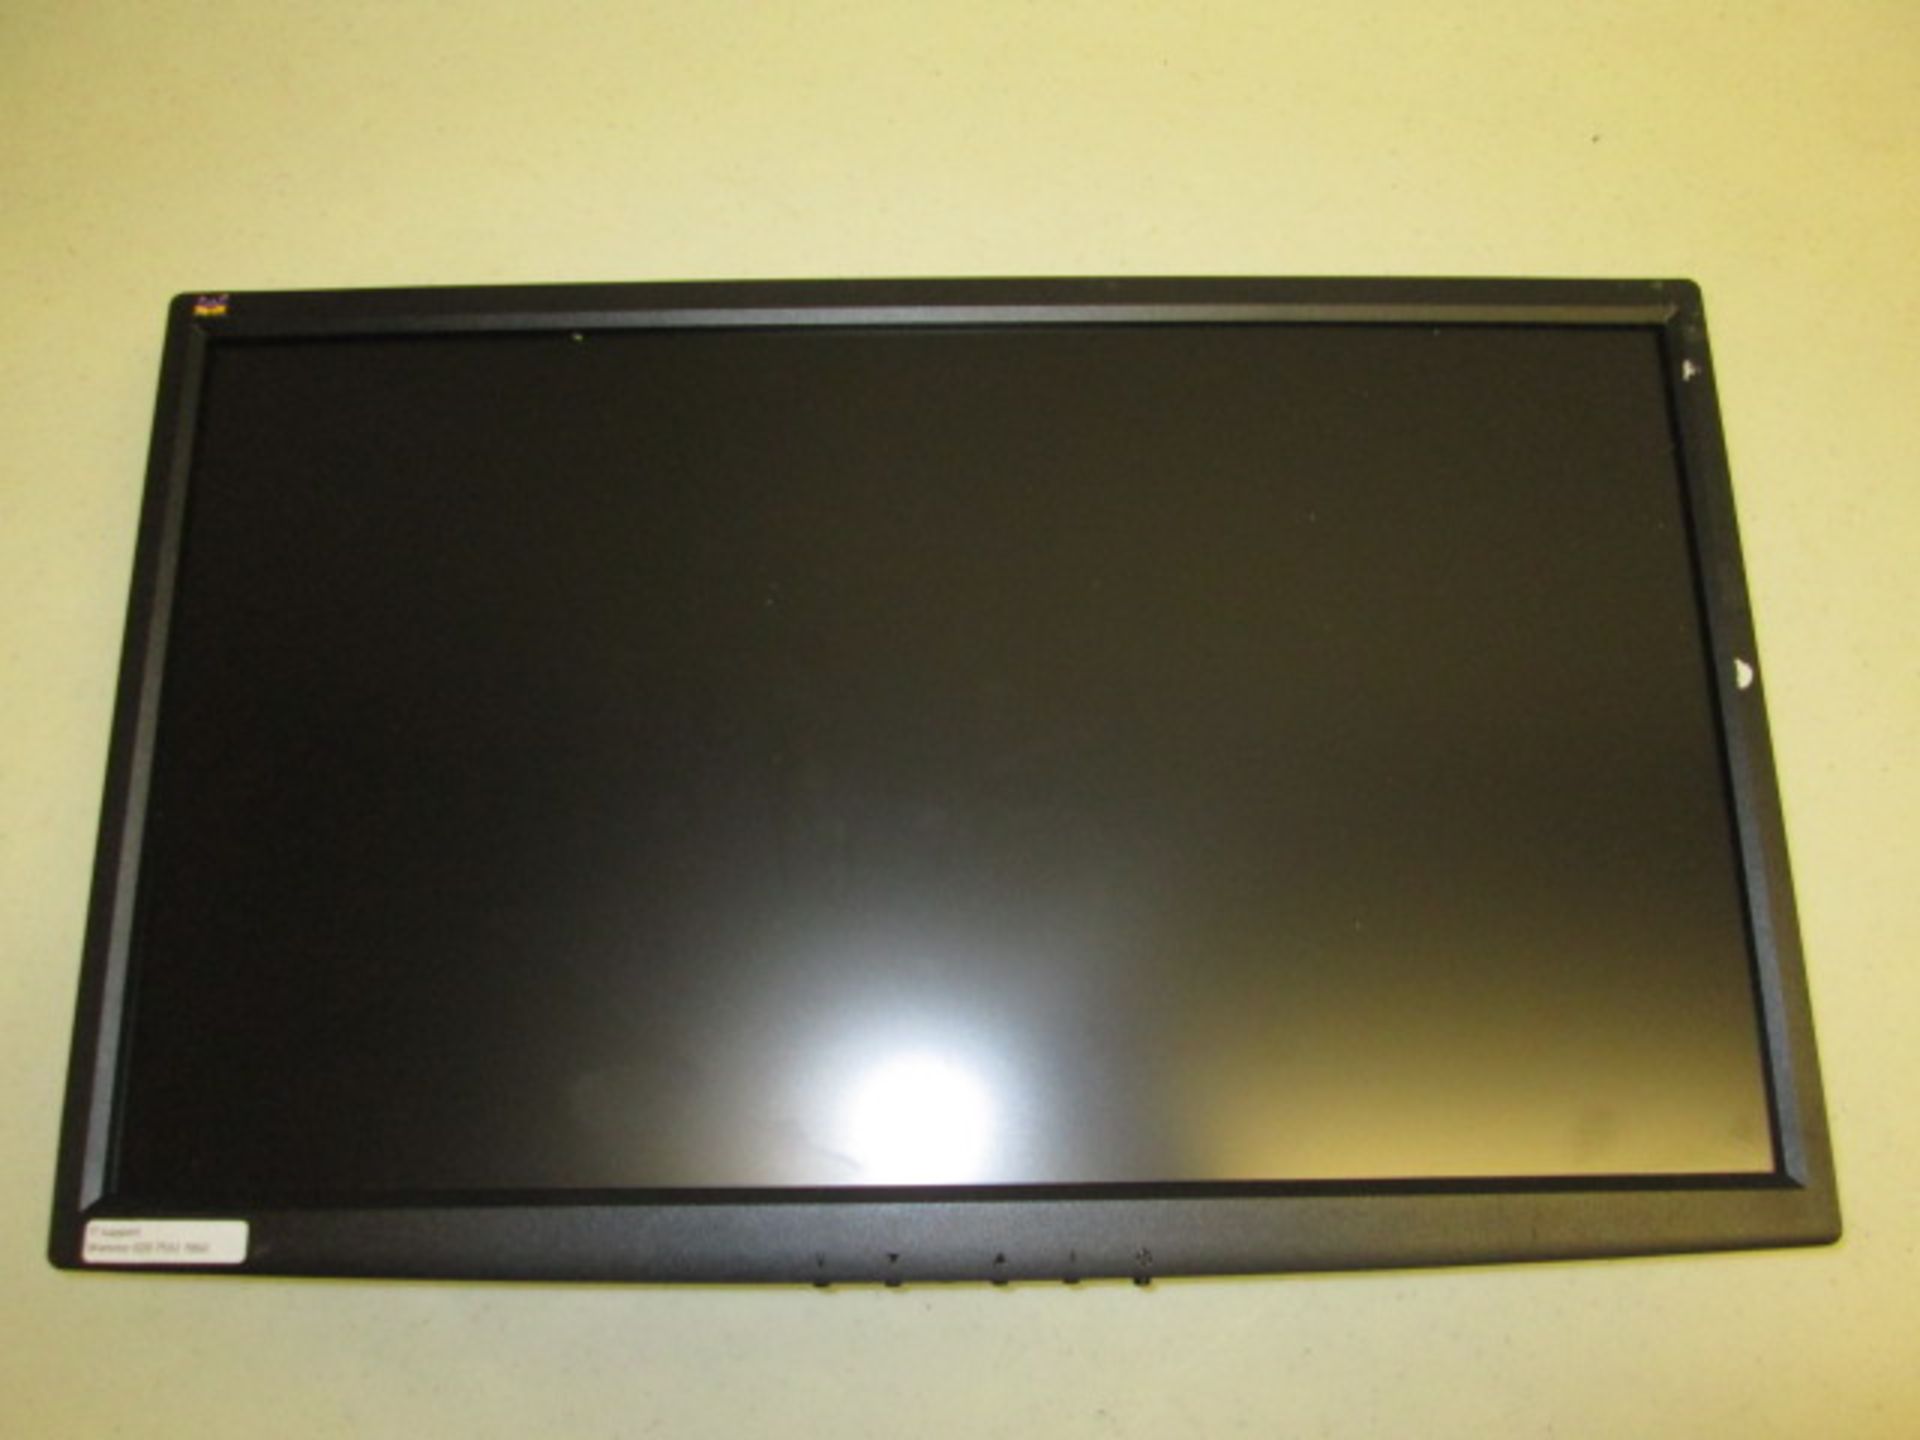 Viewsonic 21.5" Widescreen LCD Monitor. Model VG2233-LED. With VGA Cable & Power Supply. (No Stand)